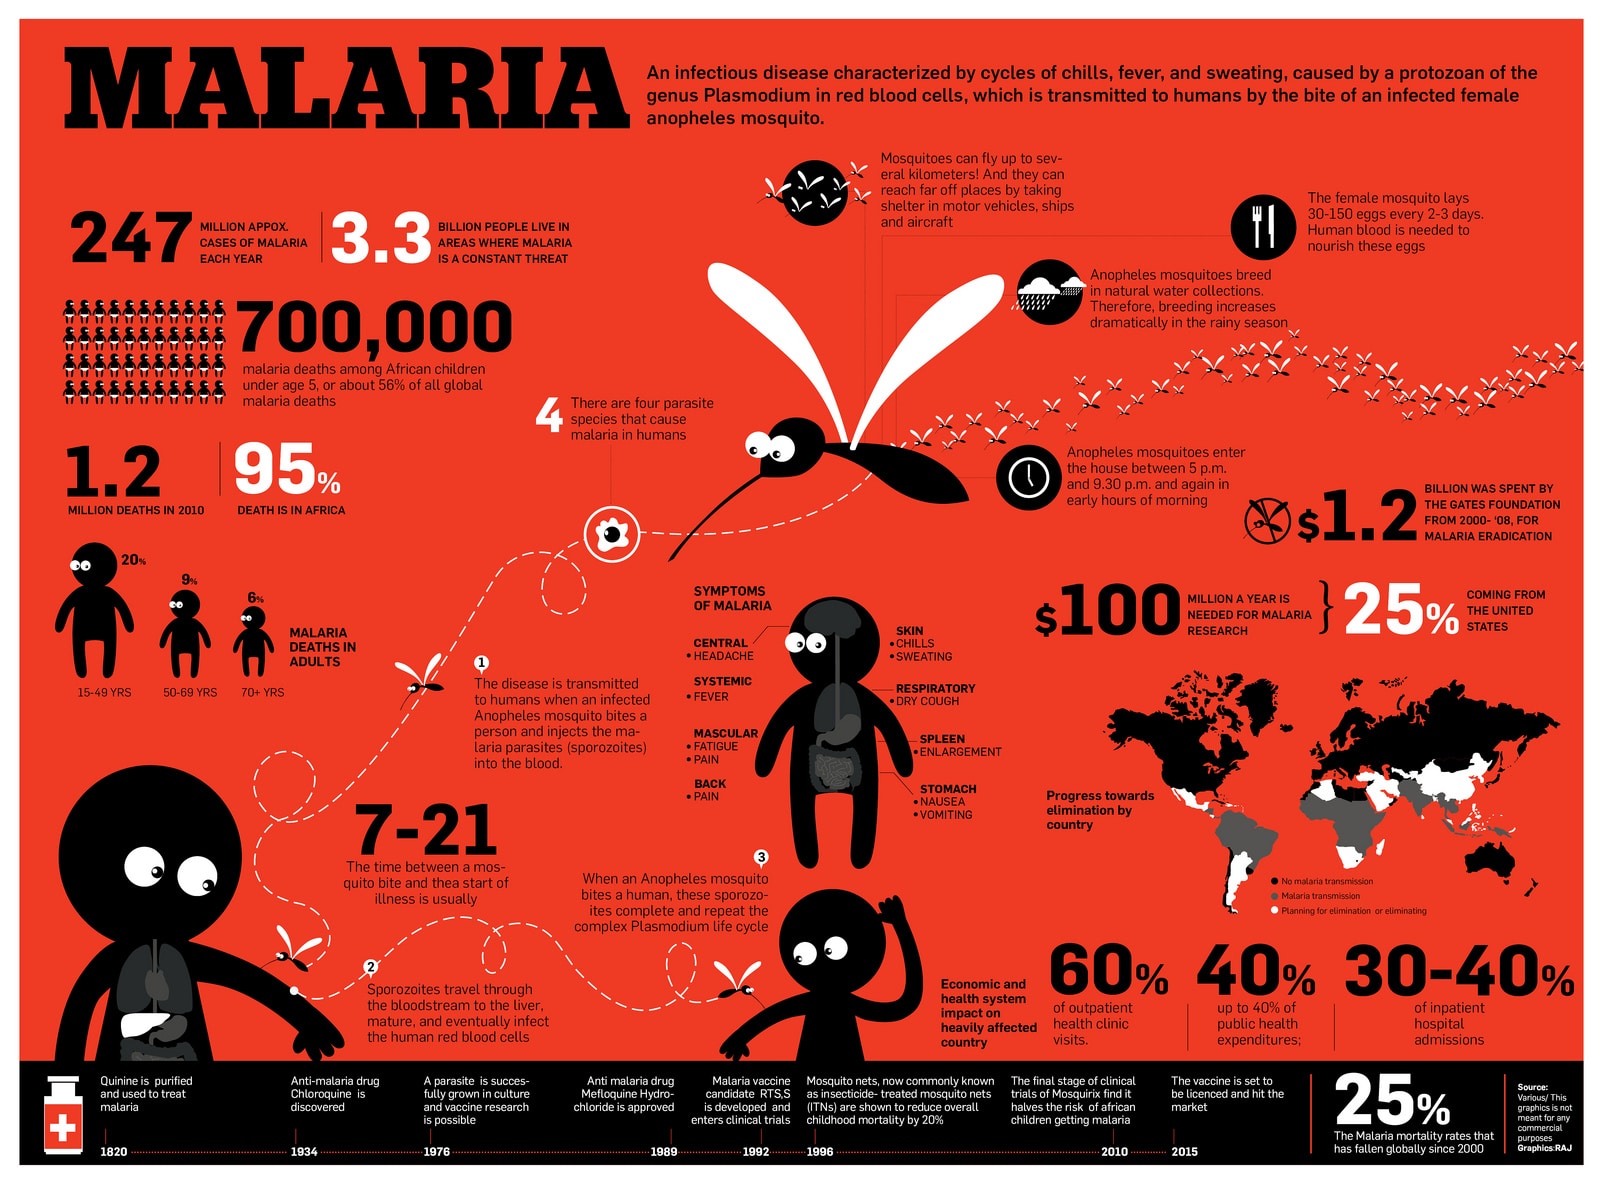 An infographic on the prevalence of malaria